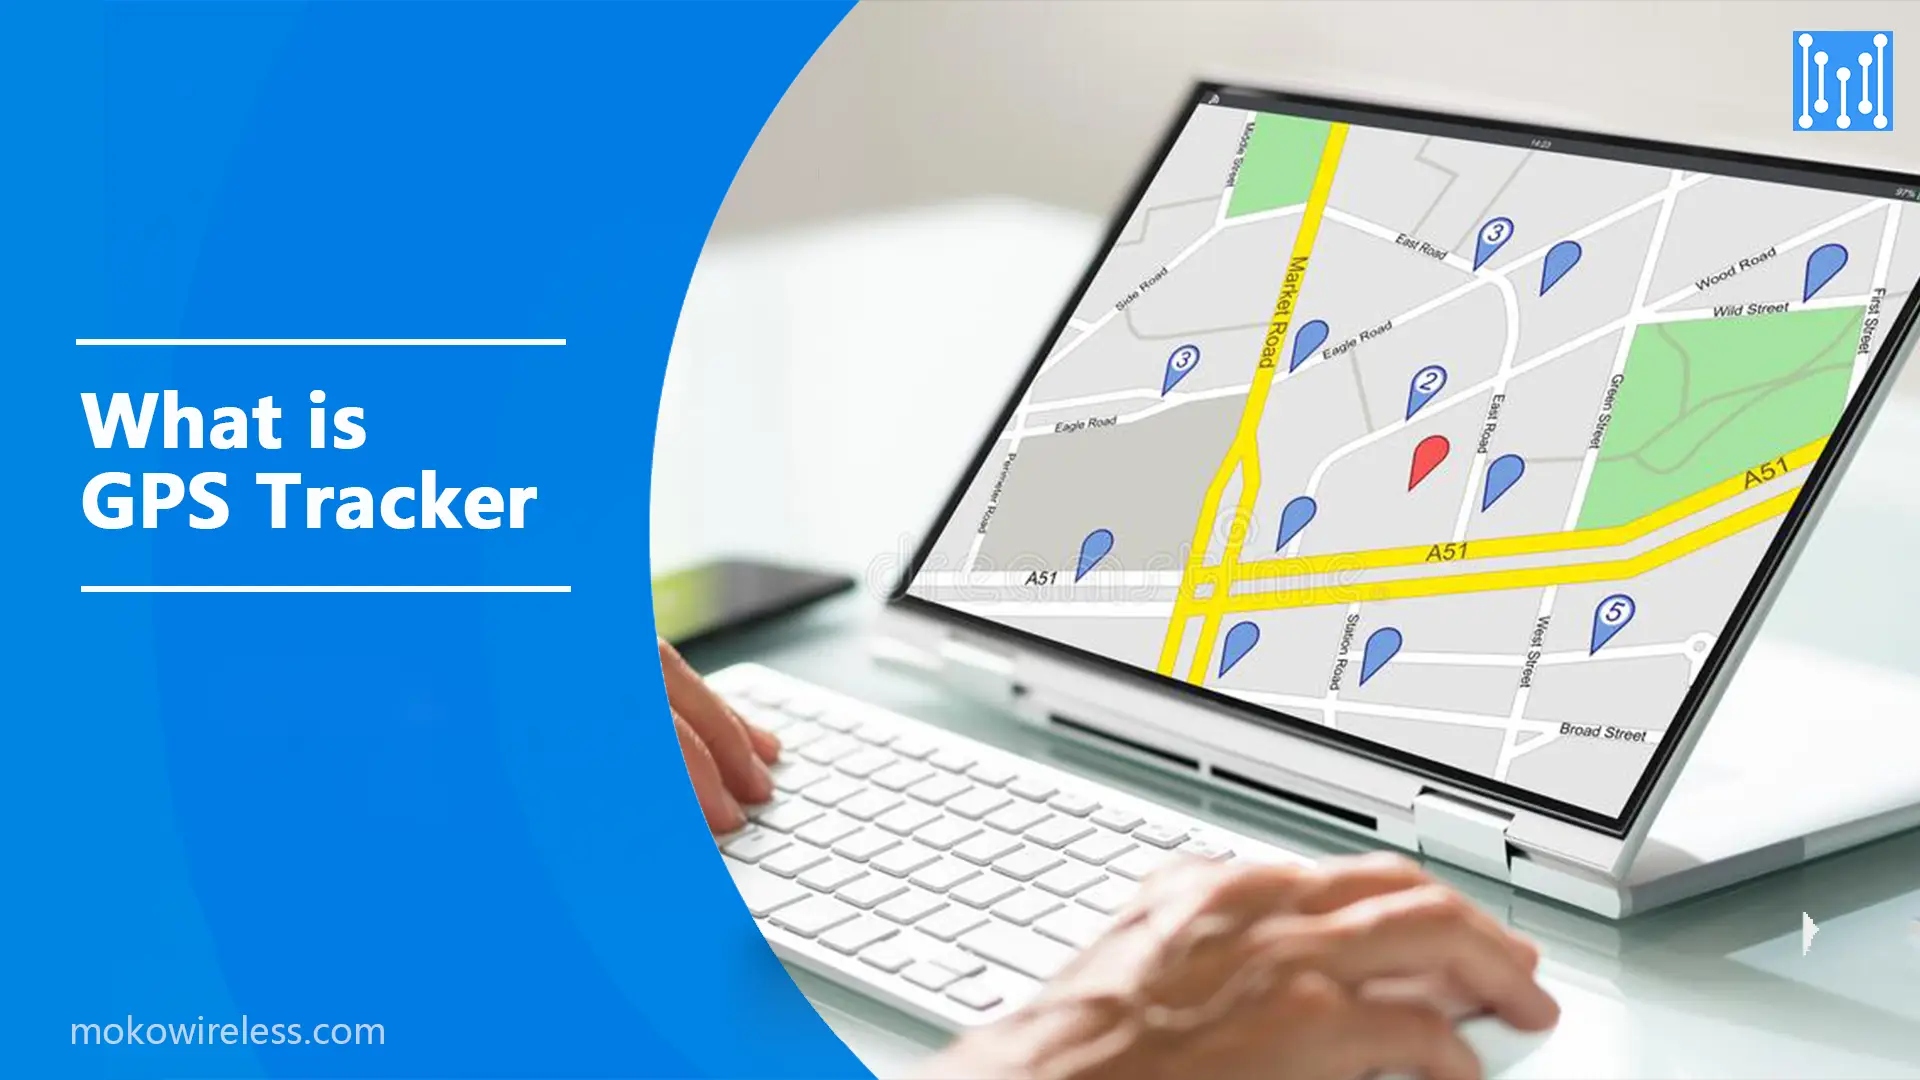 What is GPS Tracker